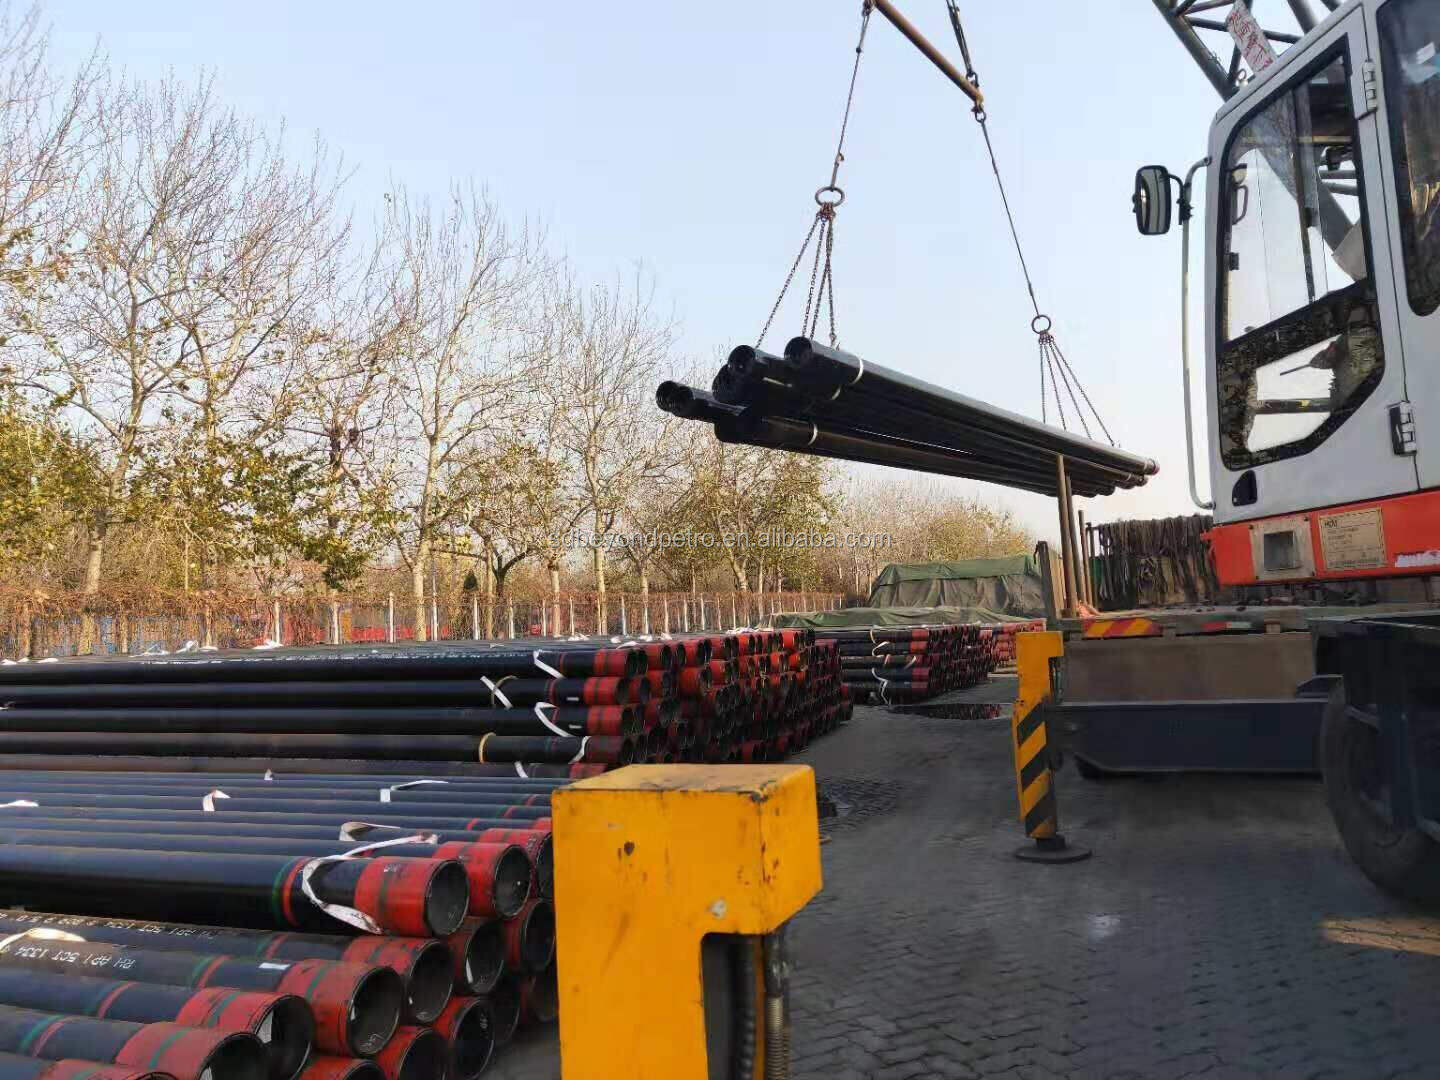 Api Seamless Steel Casing Drill Pipe or Tubing for Oil Well Drilling in Oilfield casing steel pipe manufacture